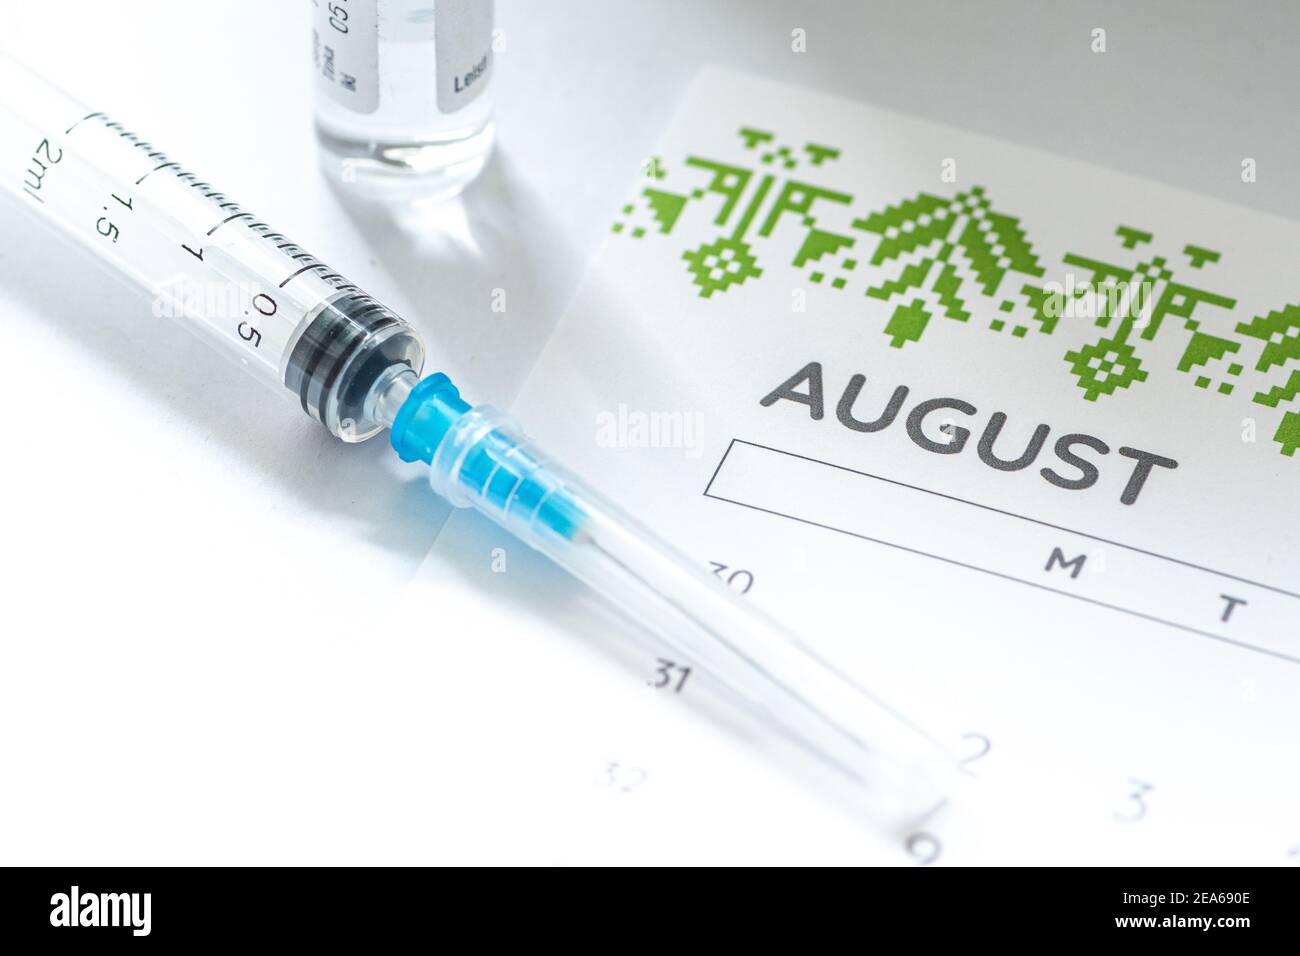 Syringe, glass vial or phial and calendar with month of August on a white table ready to be used. Covid or Coronavirus vaccine background, close up Stock Photo